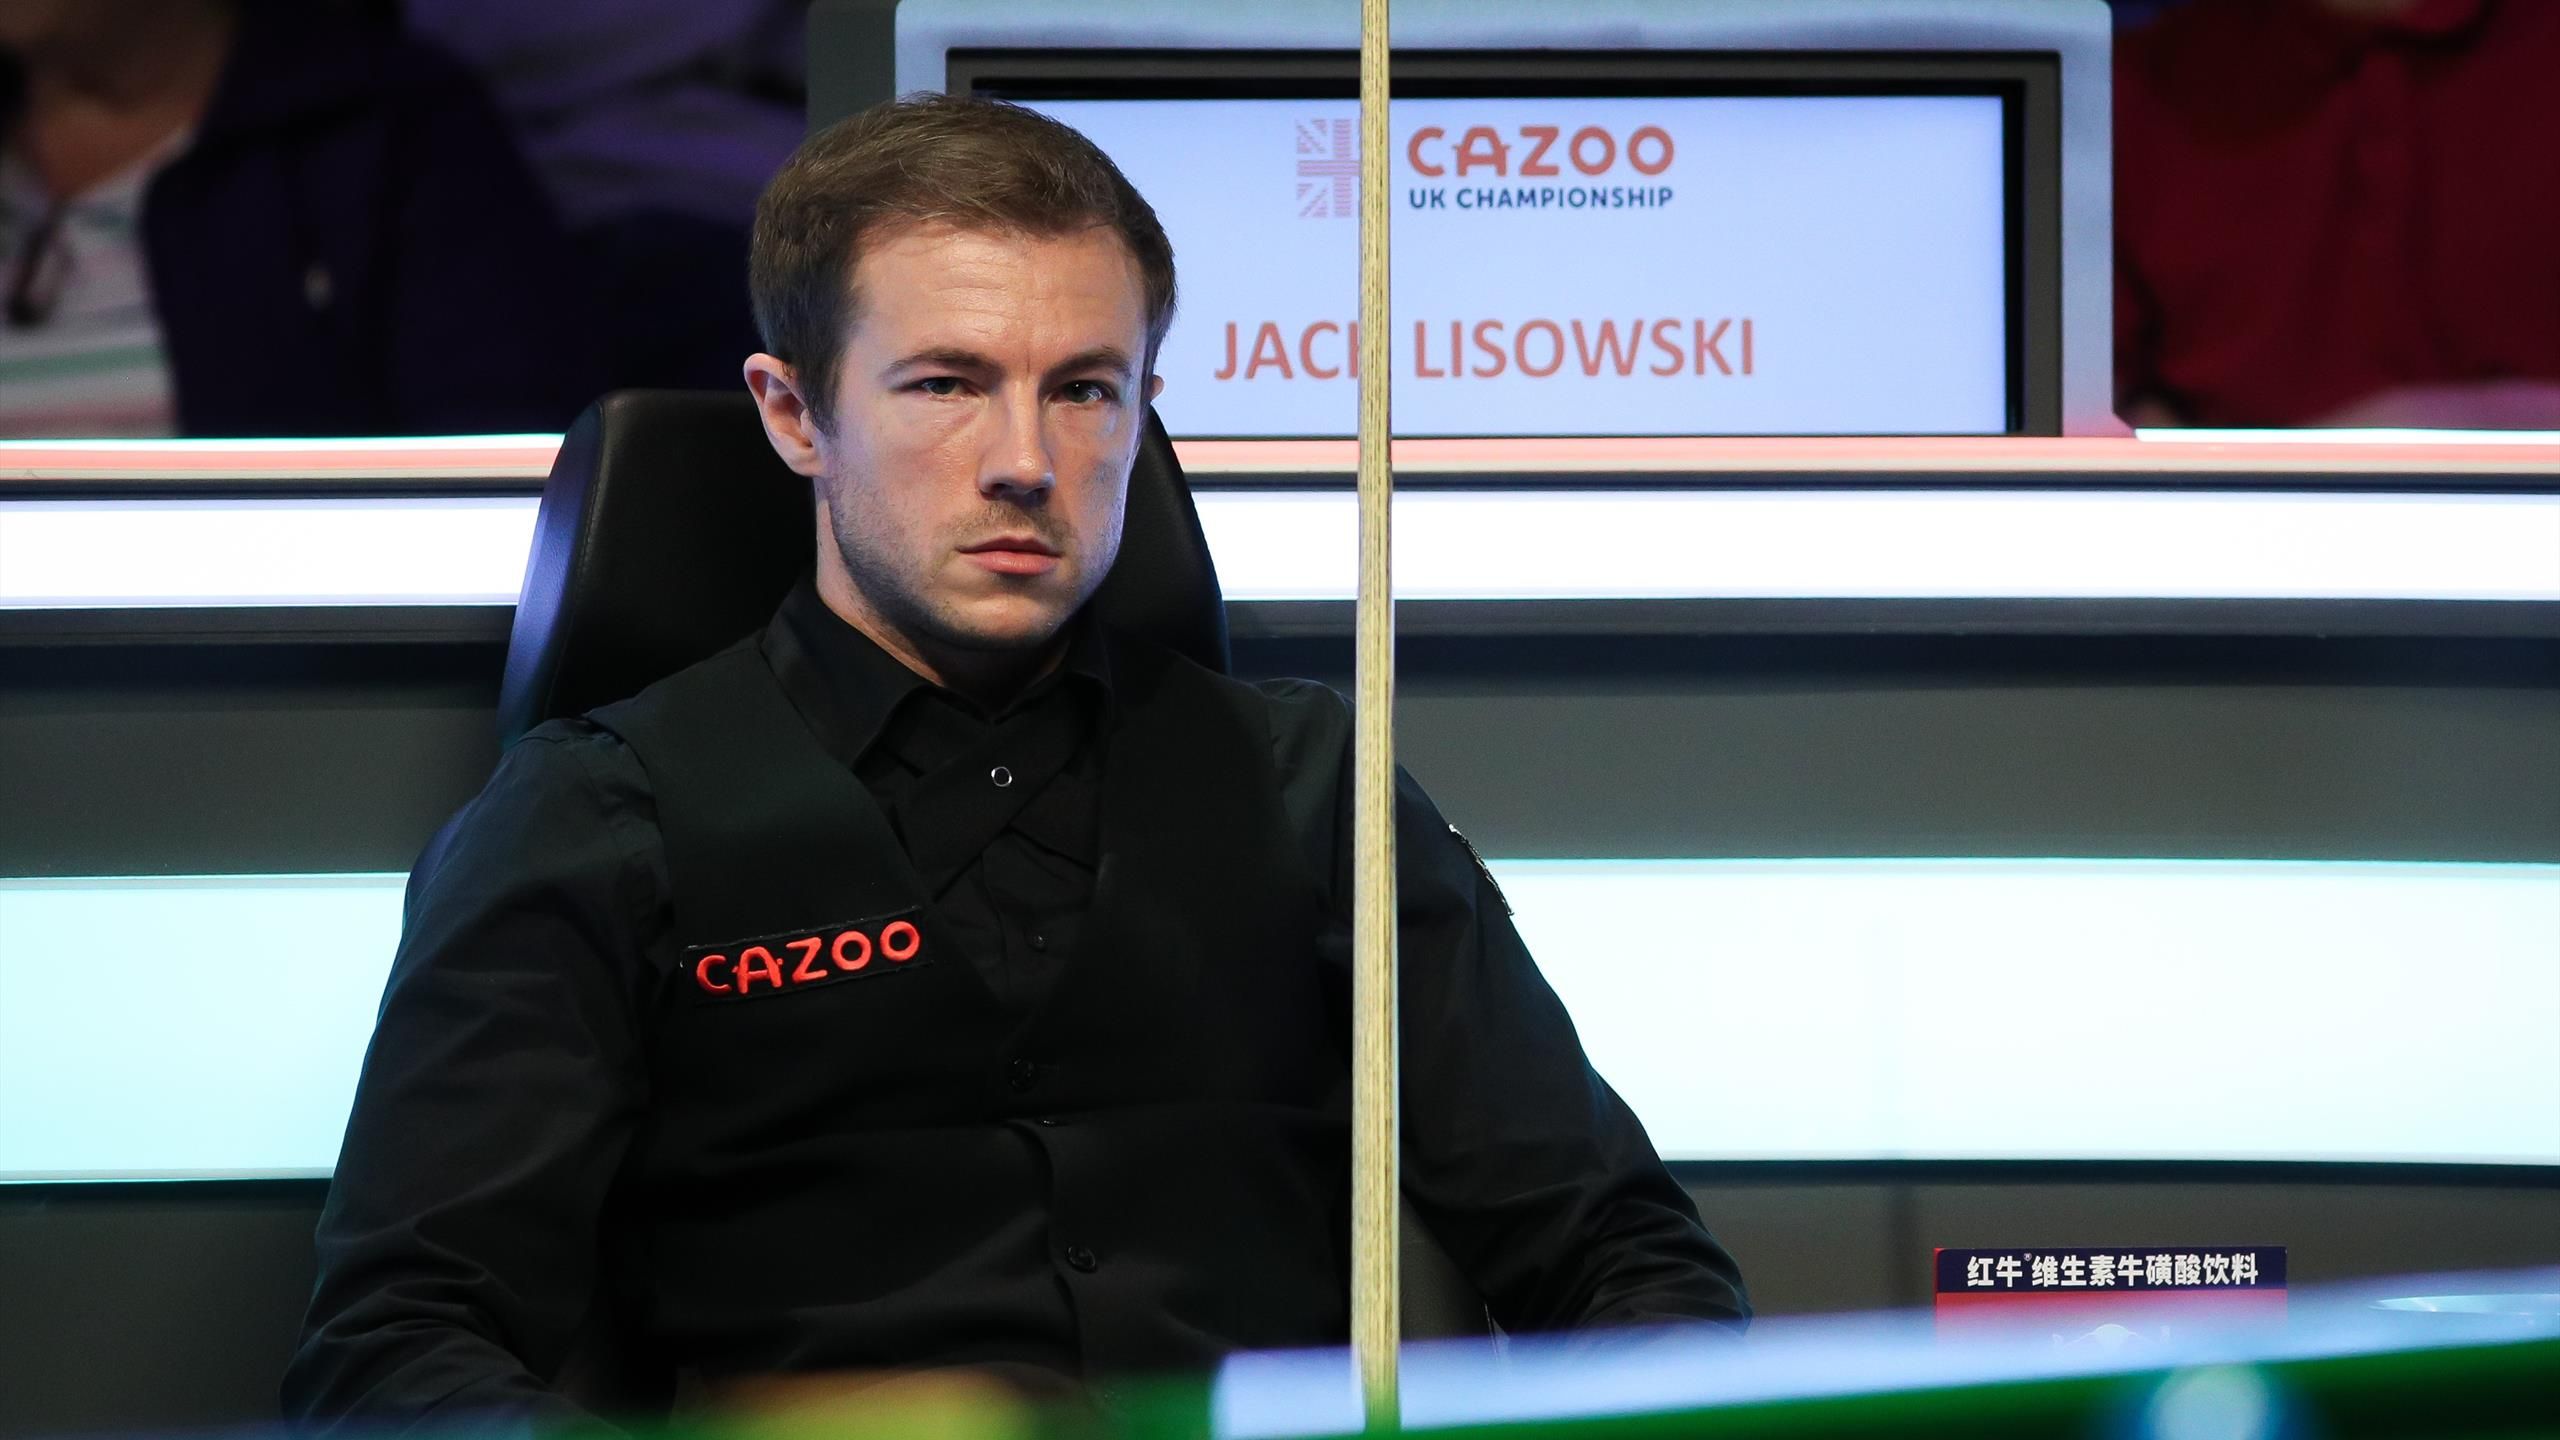 The sky is the limit for Jack Lisowski says Jimmy White after impressive victory over John Higgins at the Masters